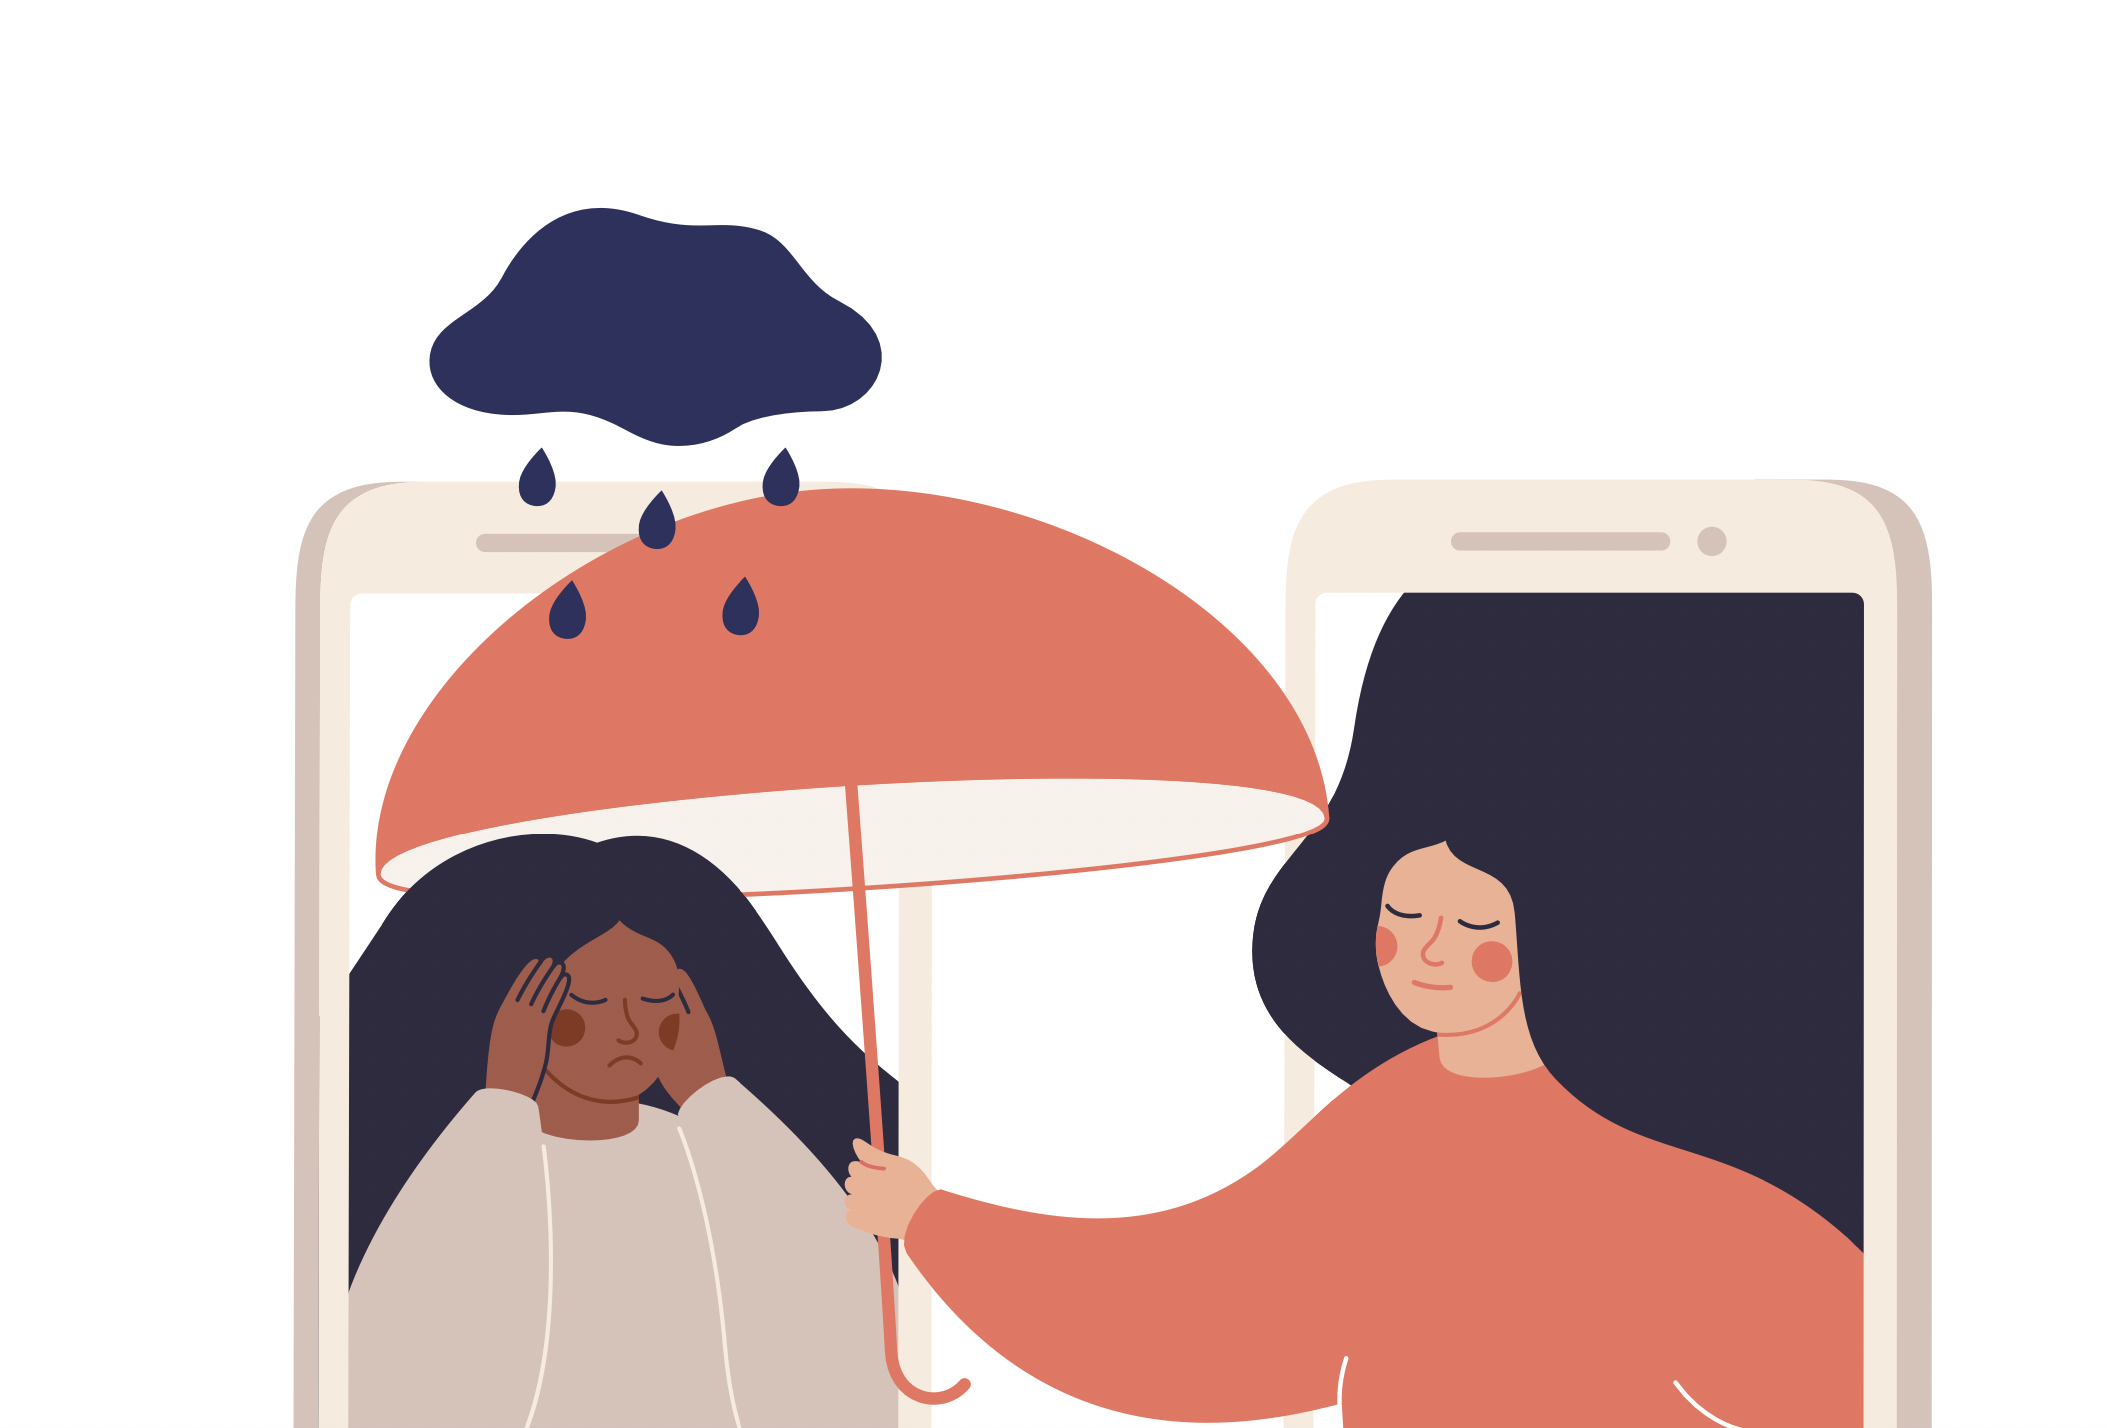 Drawing of one woman holding an umbrella through a phone screen to a crying woman to represent telehealth therapy.